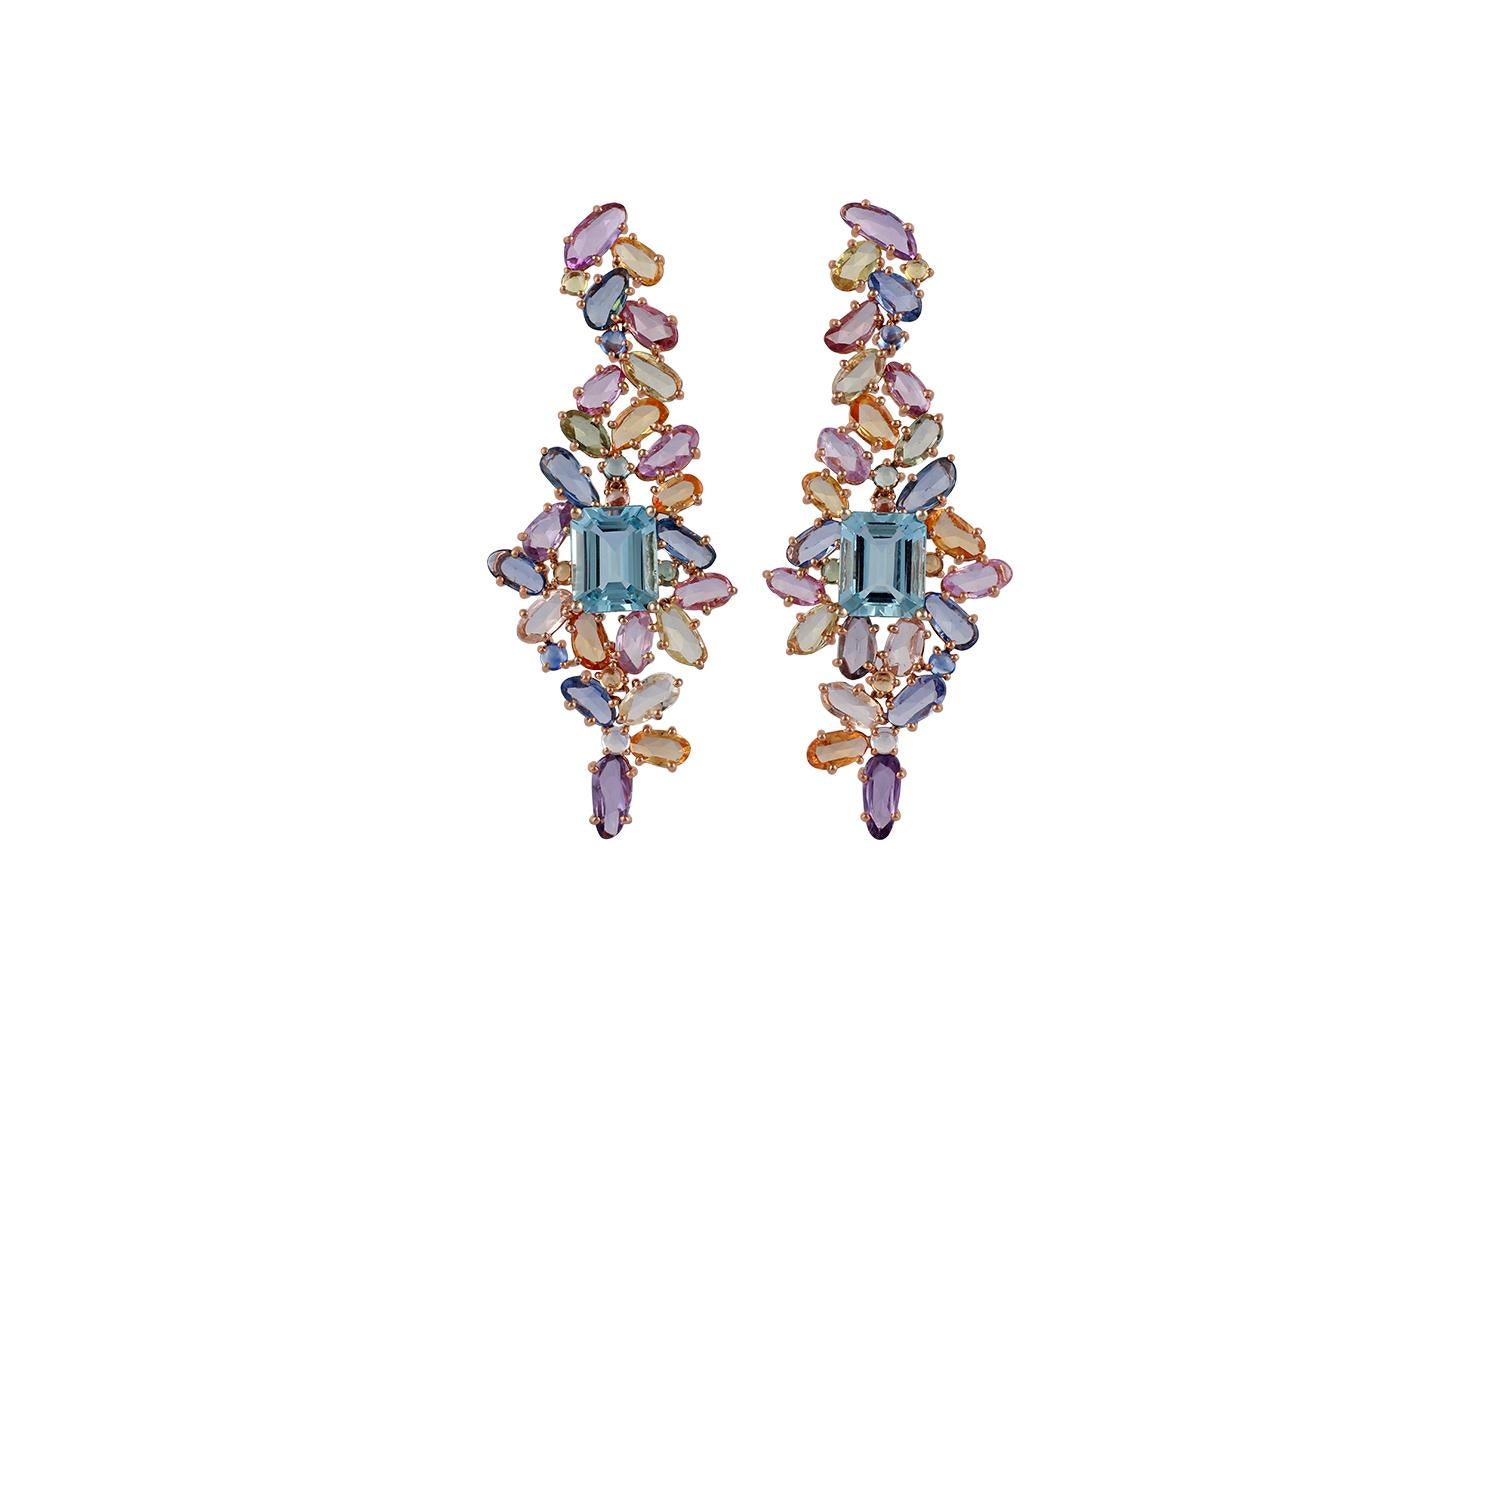 These are the designer earrings pair studded in 18K rose gold, features 46 pieces of rose cuts multi colour sapphire weight 19.46 carats, 18 pieces of round shaped cabochon multi colour sapphire weight 2.26 carats & 2 pieces of octagon-shaped fine